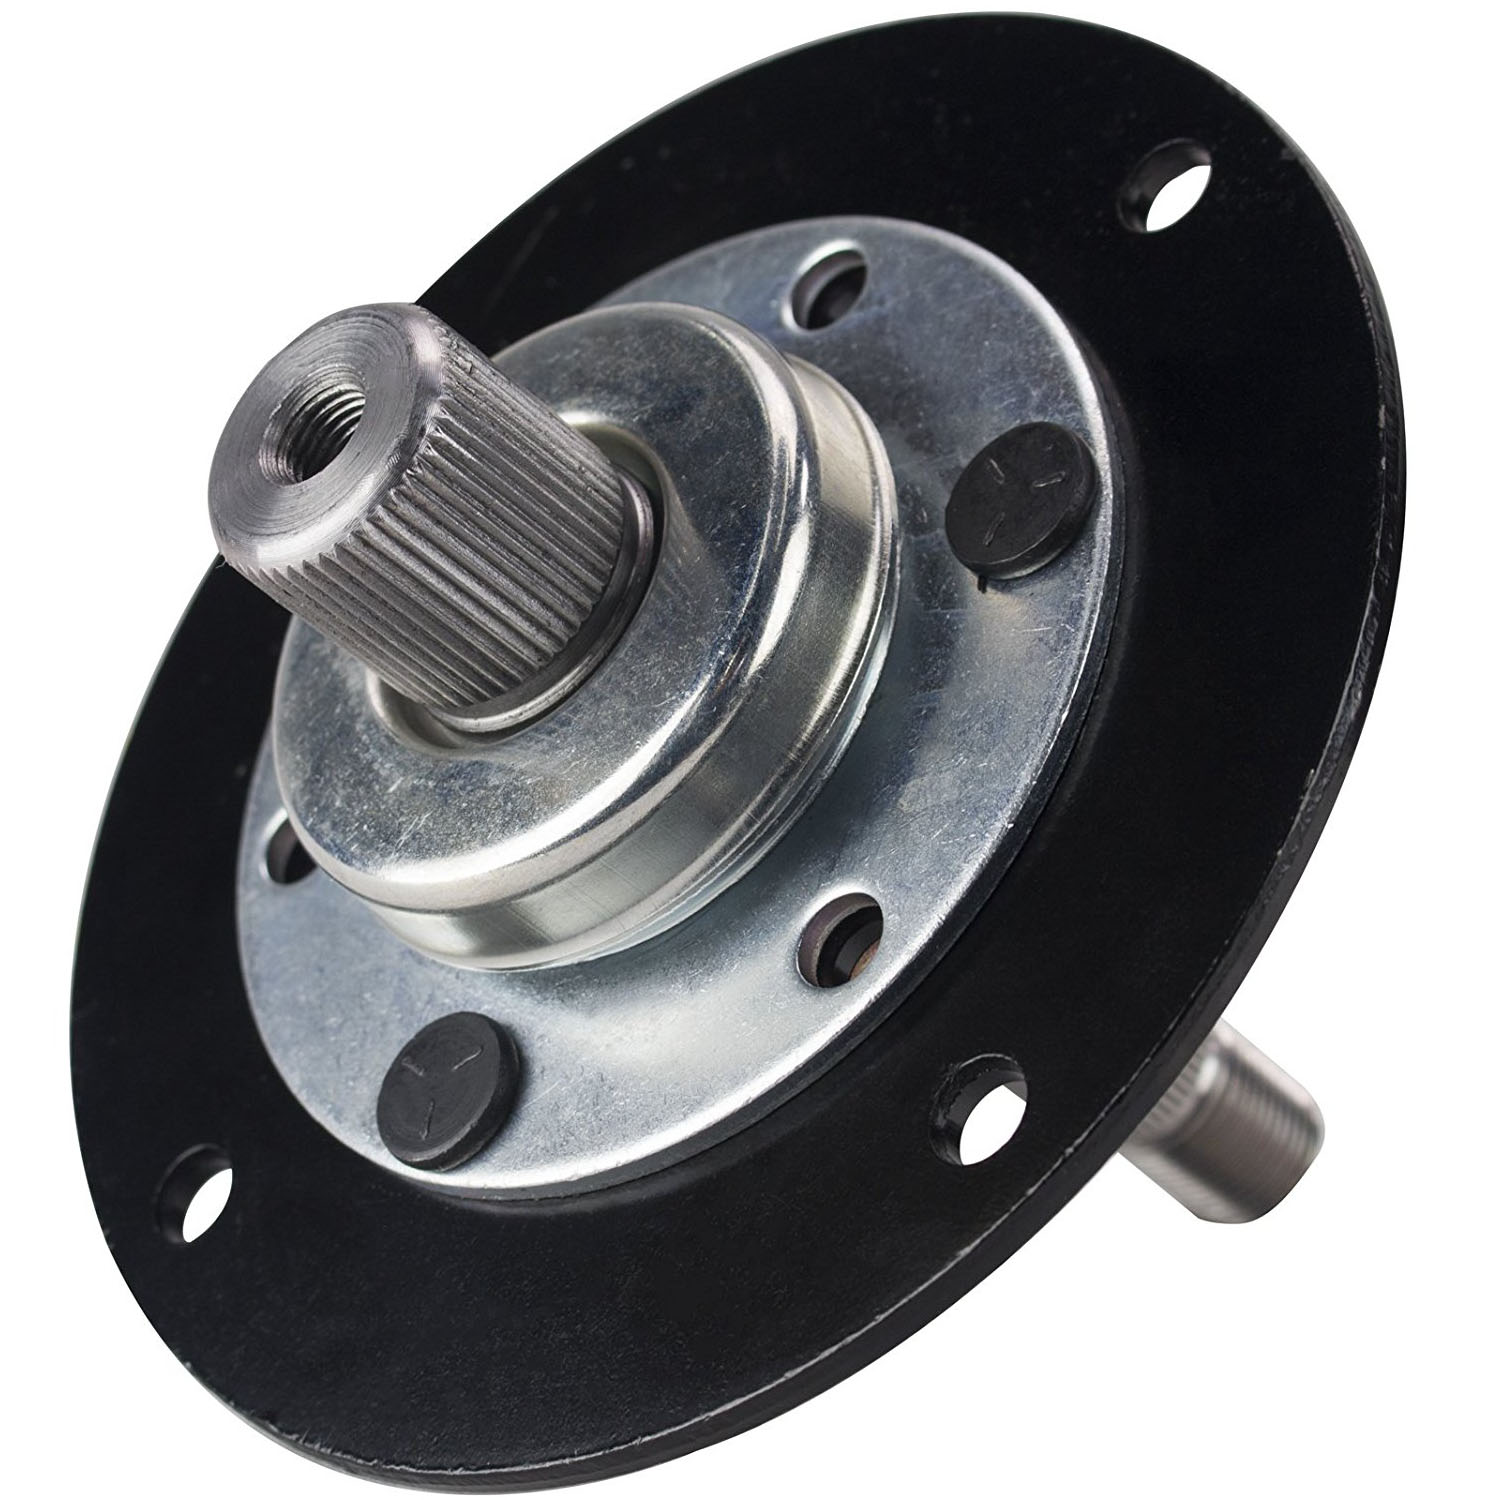 Replacement mower spindle for MTD 717-0906, 717-0906A, 753-05319, 917-0906, 917-0906A